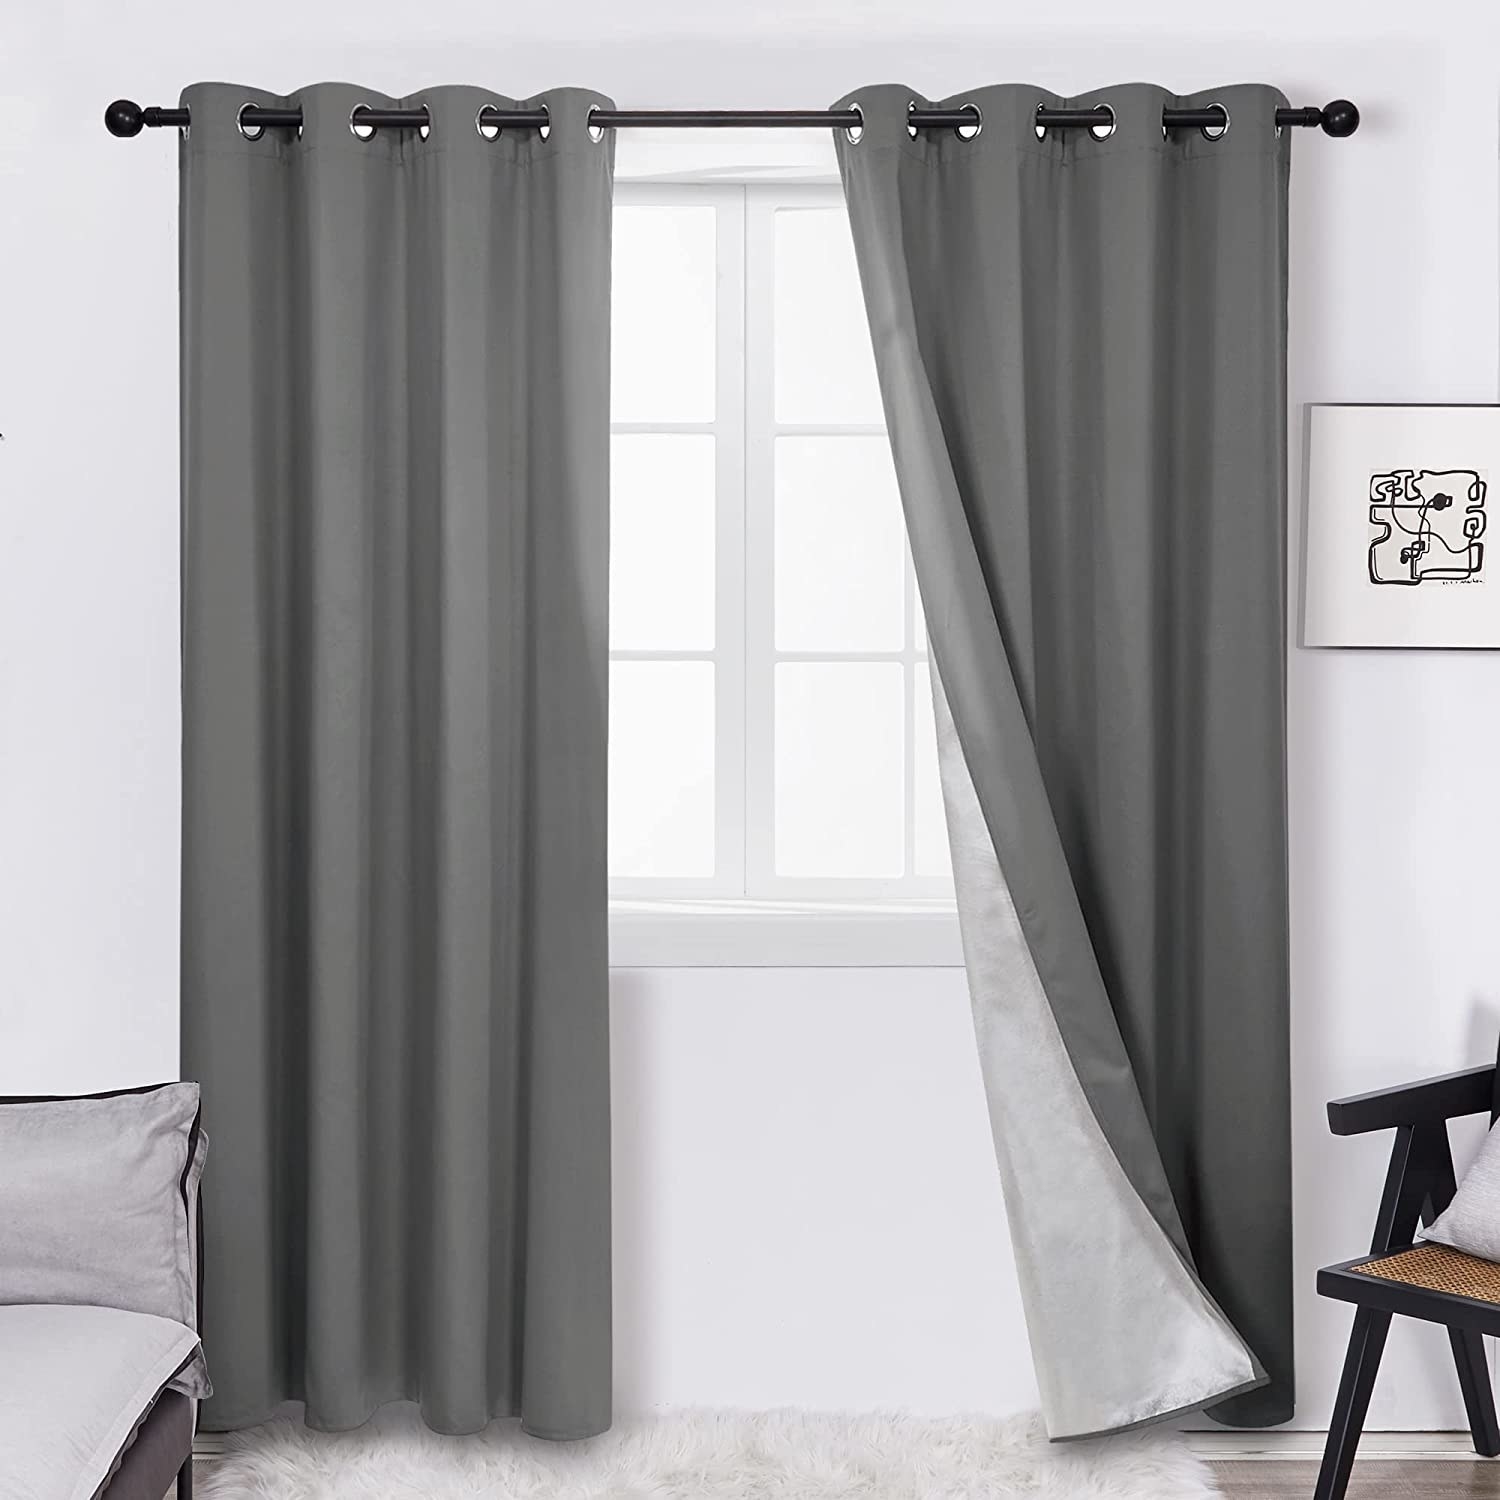 a pair of blackout curtains hung on a window